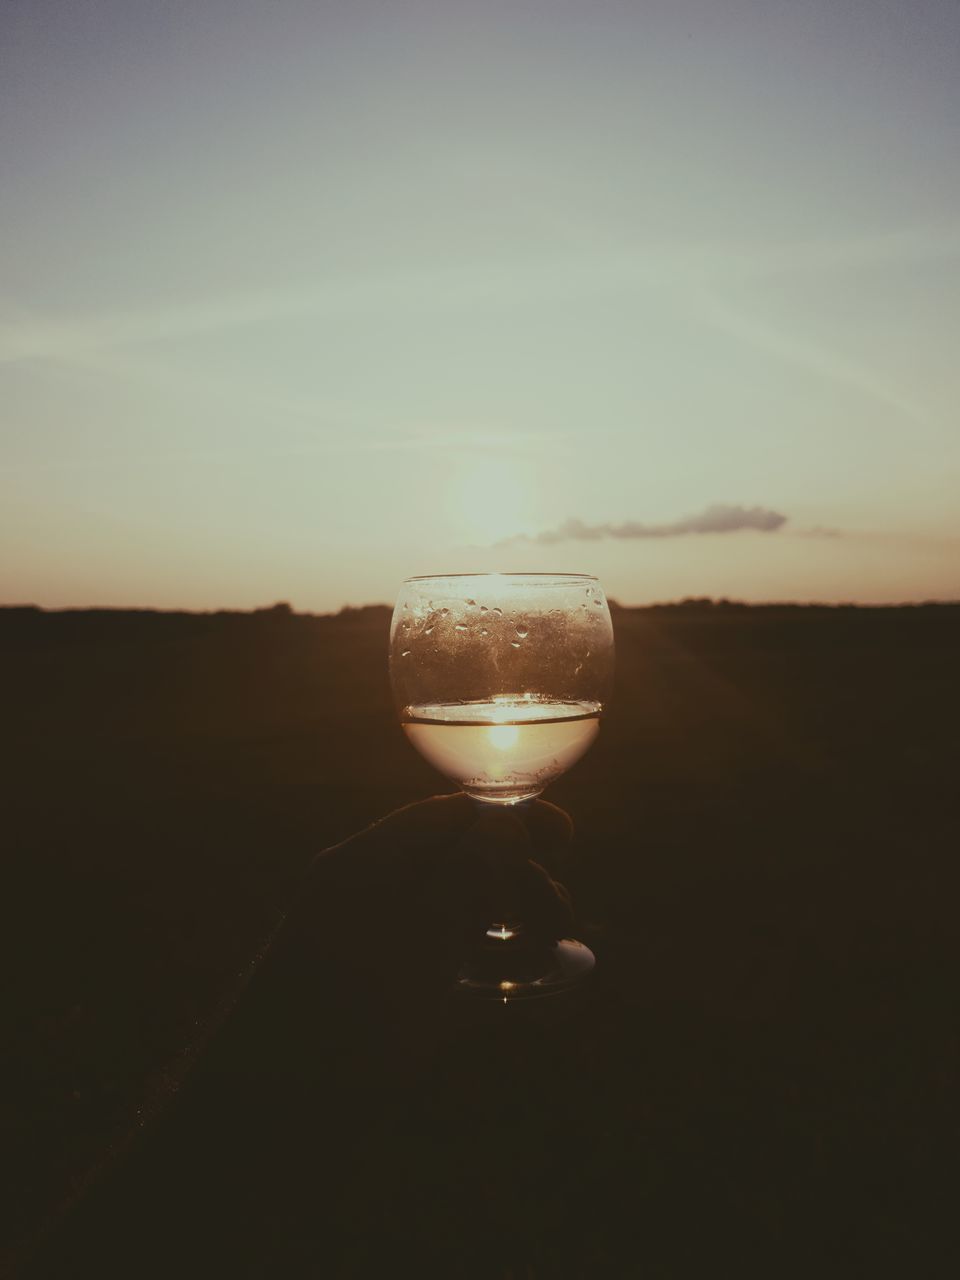 CLOSE-UP OF BEER GLASS AGAINST SUNSET SKY